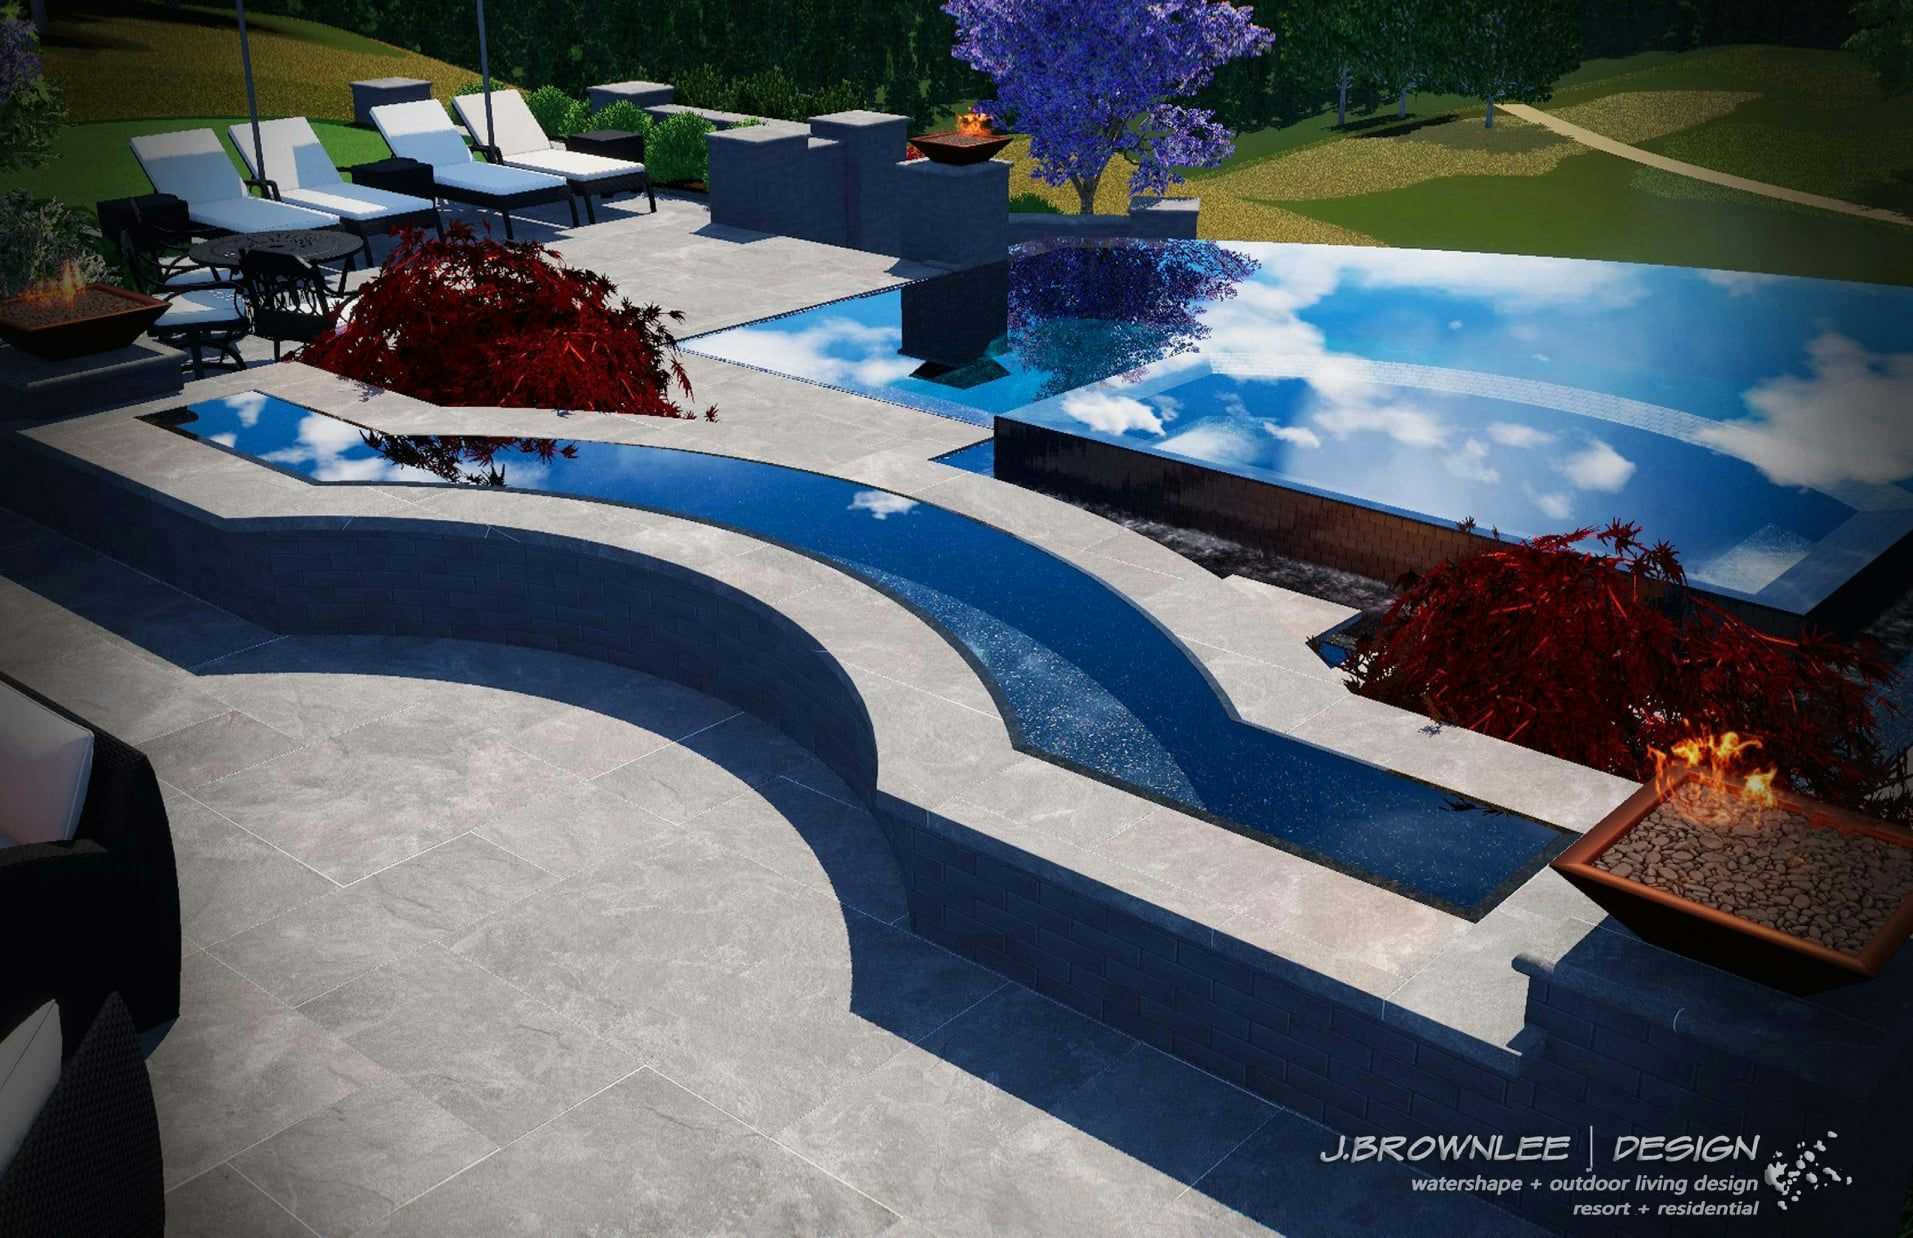 Incorporating Pool and Hardscape into Backyard Design Panel Discussion-7b896ac8-16ee-415f-88cb-8087d8050fe8